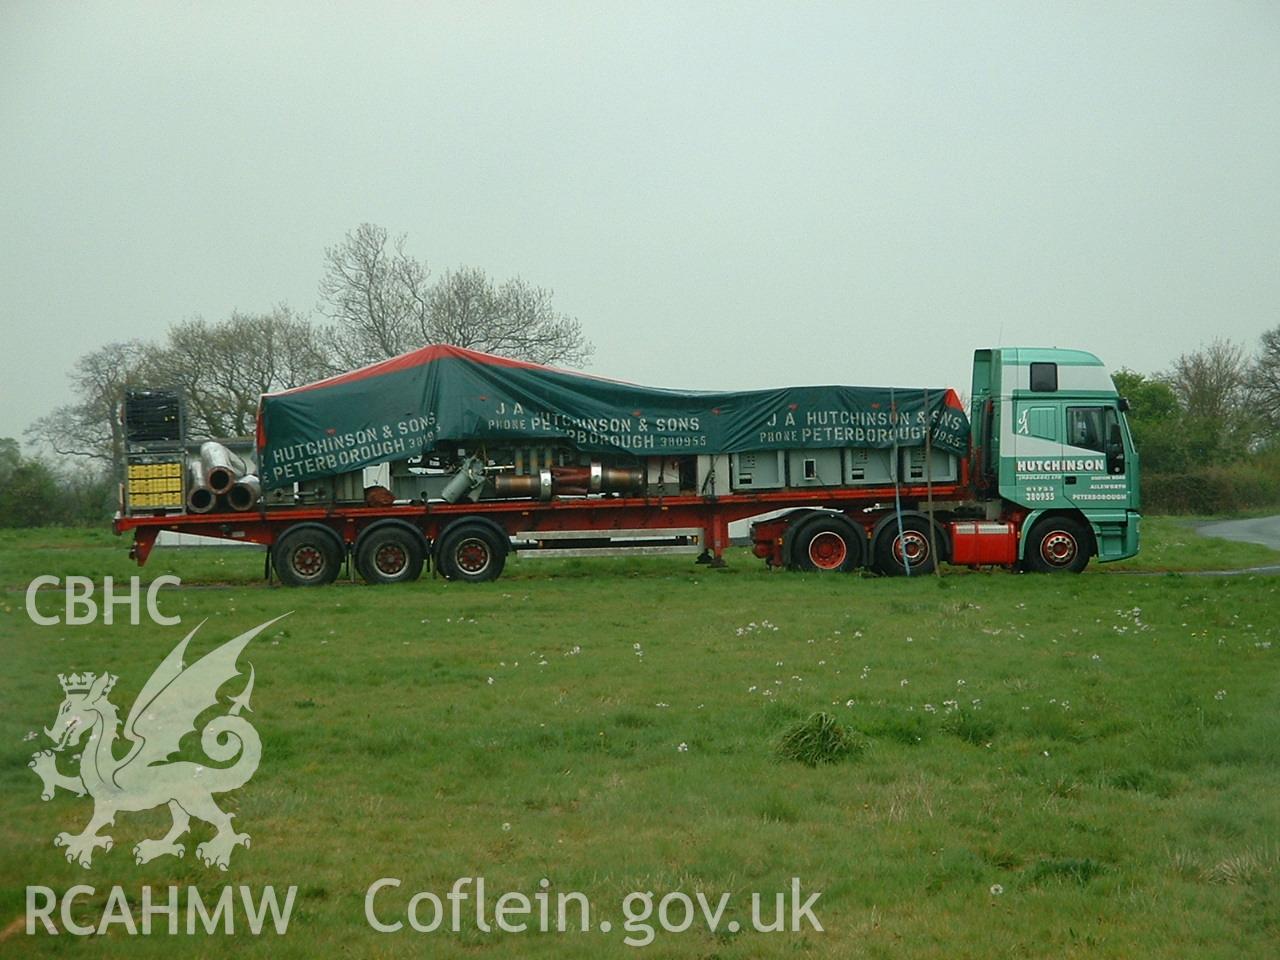 Colour digital photograph of engines being transported.